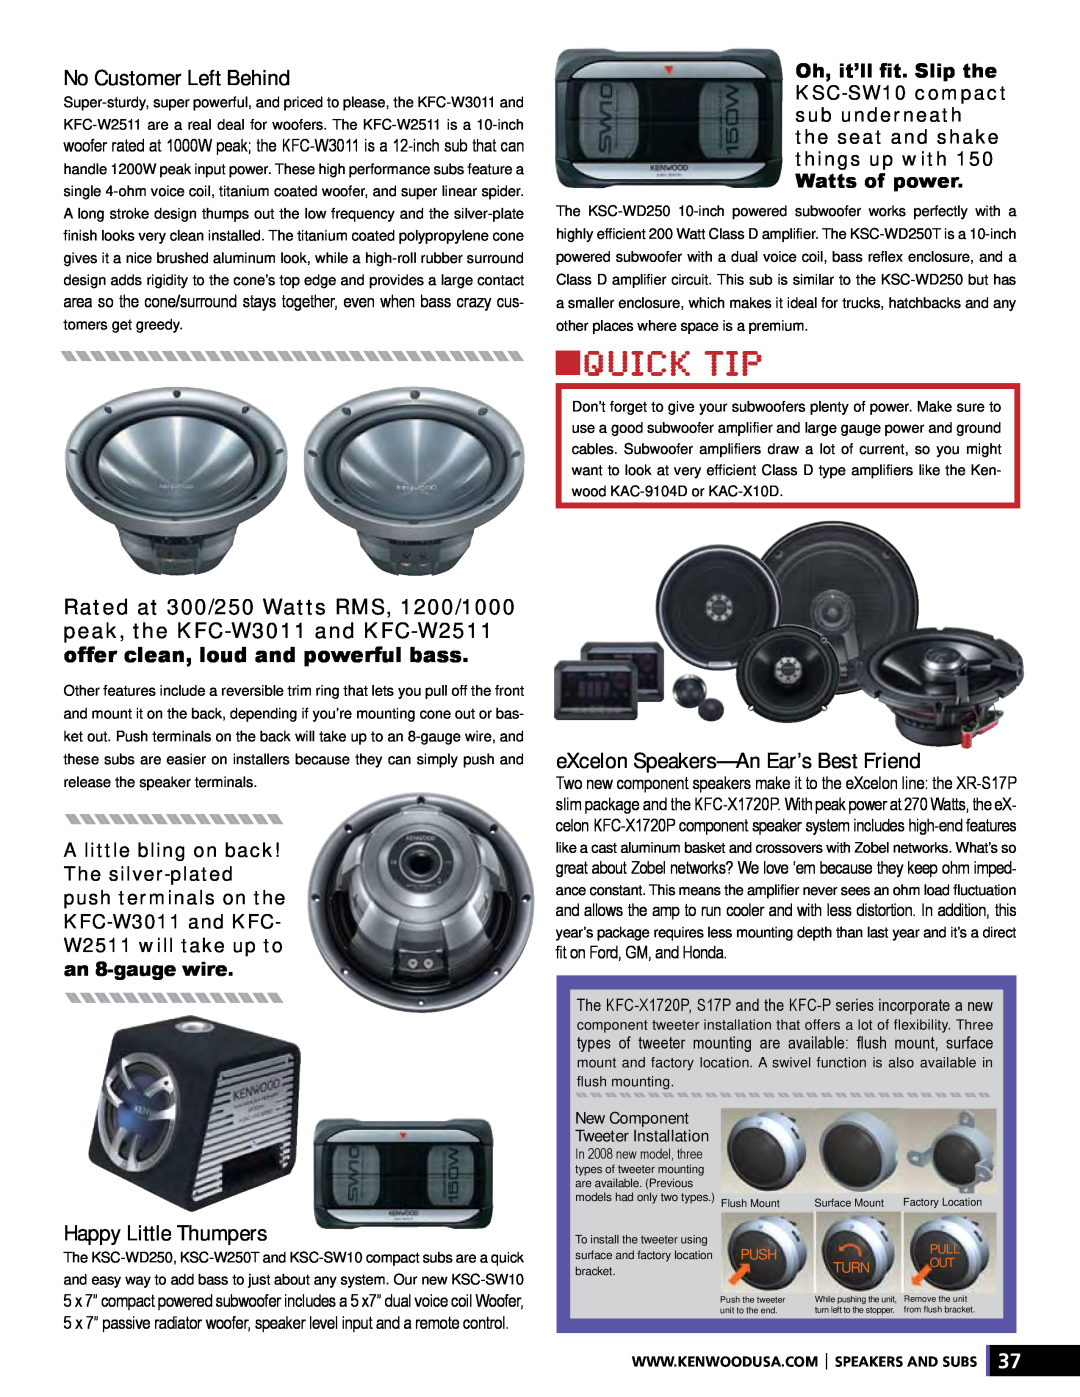 Kenwood XR-S17P manual No Customer Left Behind, eXcelon Speakers—AnEar’s Best Friend, Happy Little Thumpers 